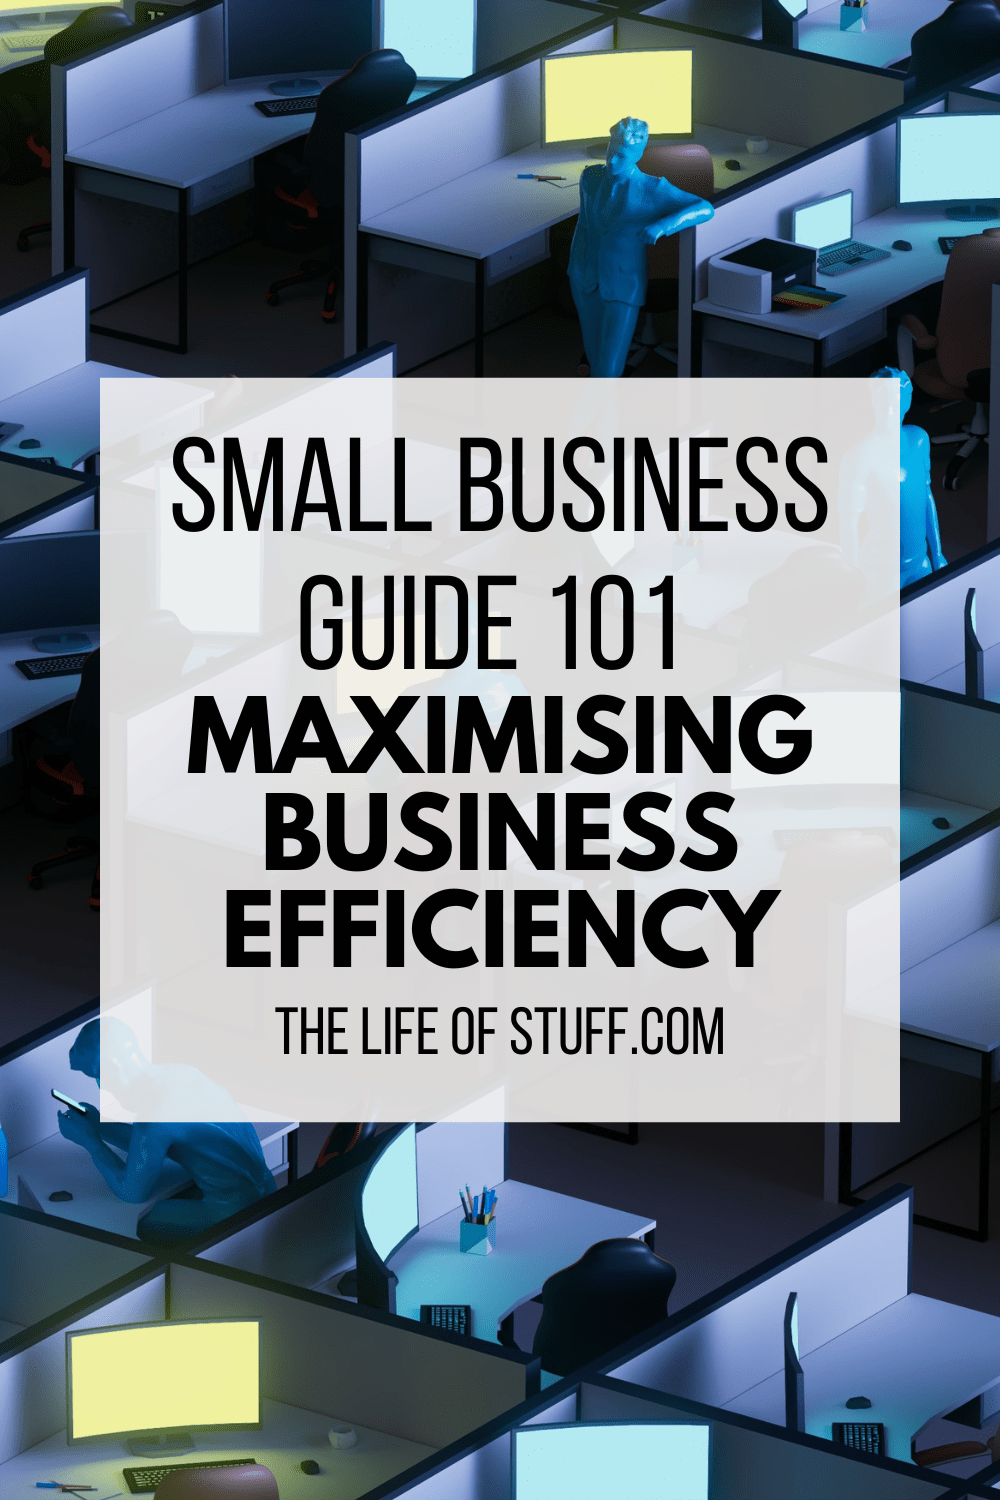 Small Business Guide 101 - Maximising Business Efficiency - The Life of Stuff